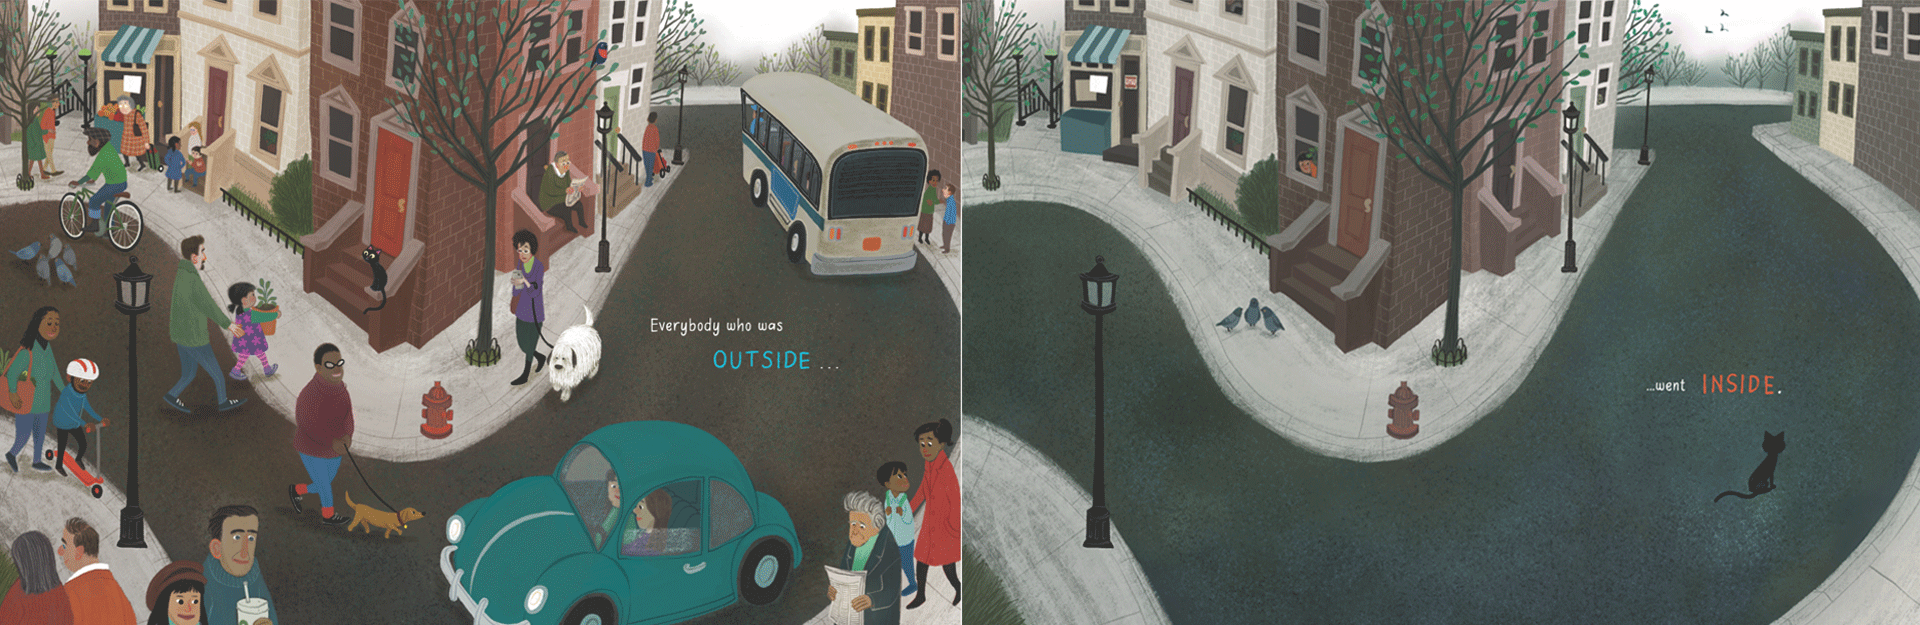 Pages from the children's book "Outside, Inside" by LeUyen Pham about life during the pandemic.